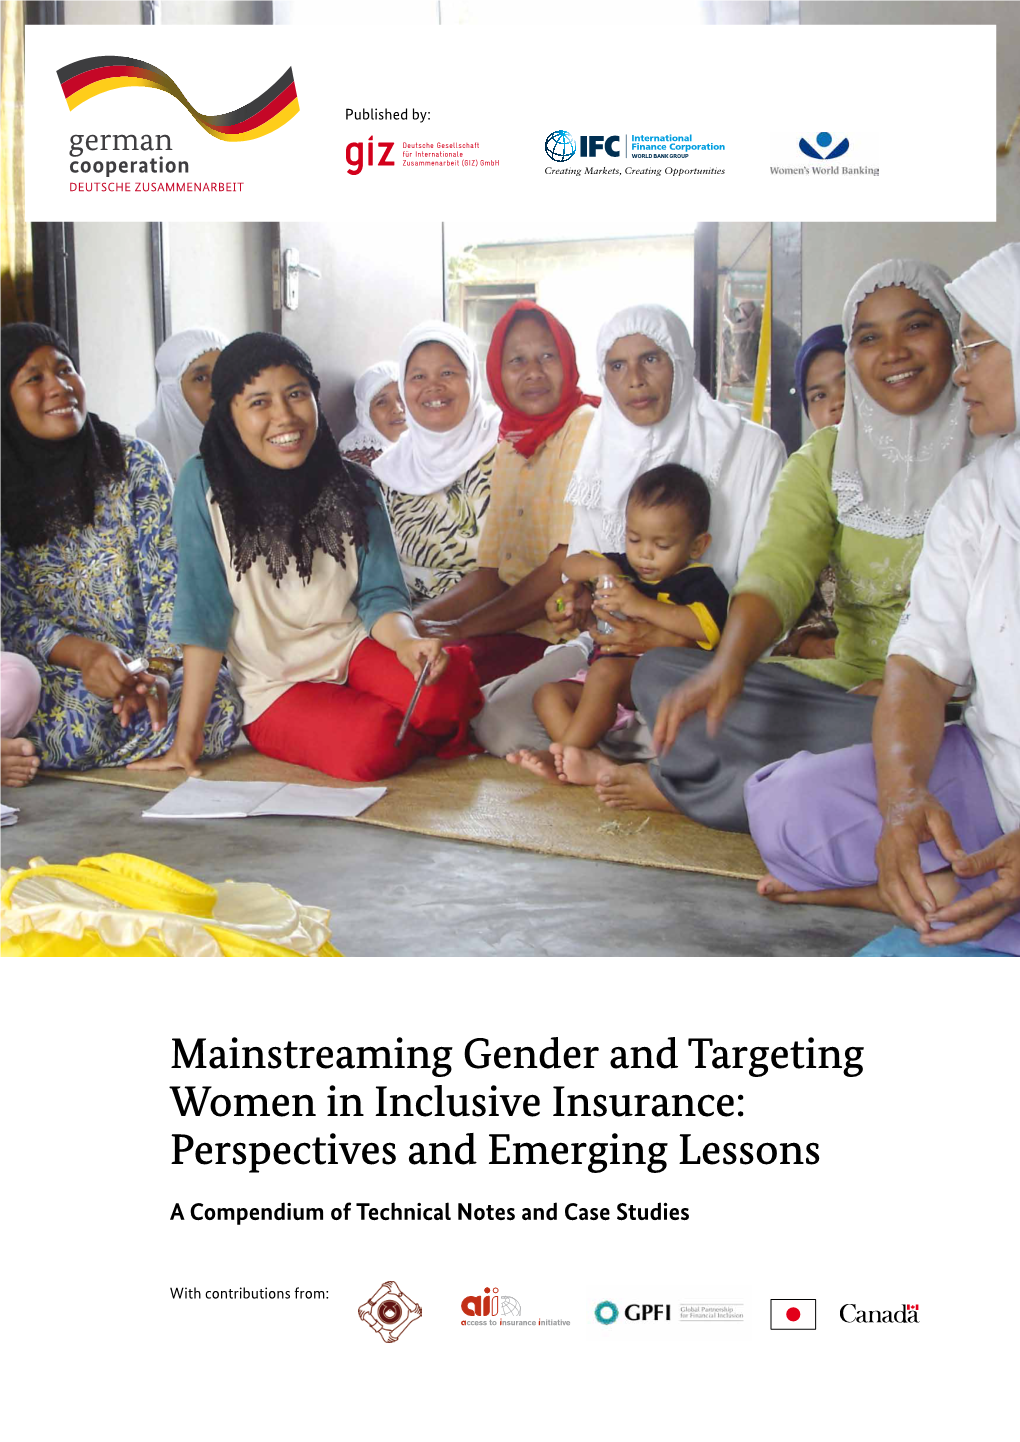 Mainstreaming Gender and Targeting Women in Inclusive Insurance: Perspectives and Emerging Lessons